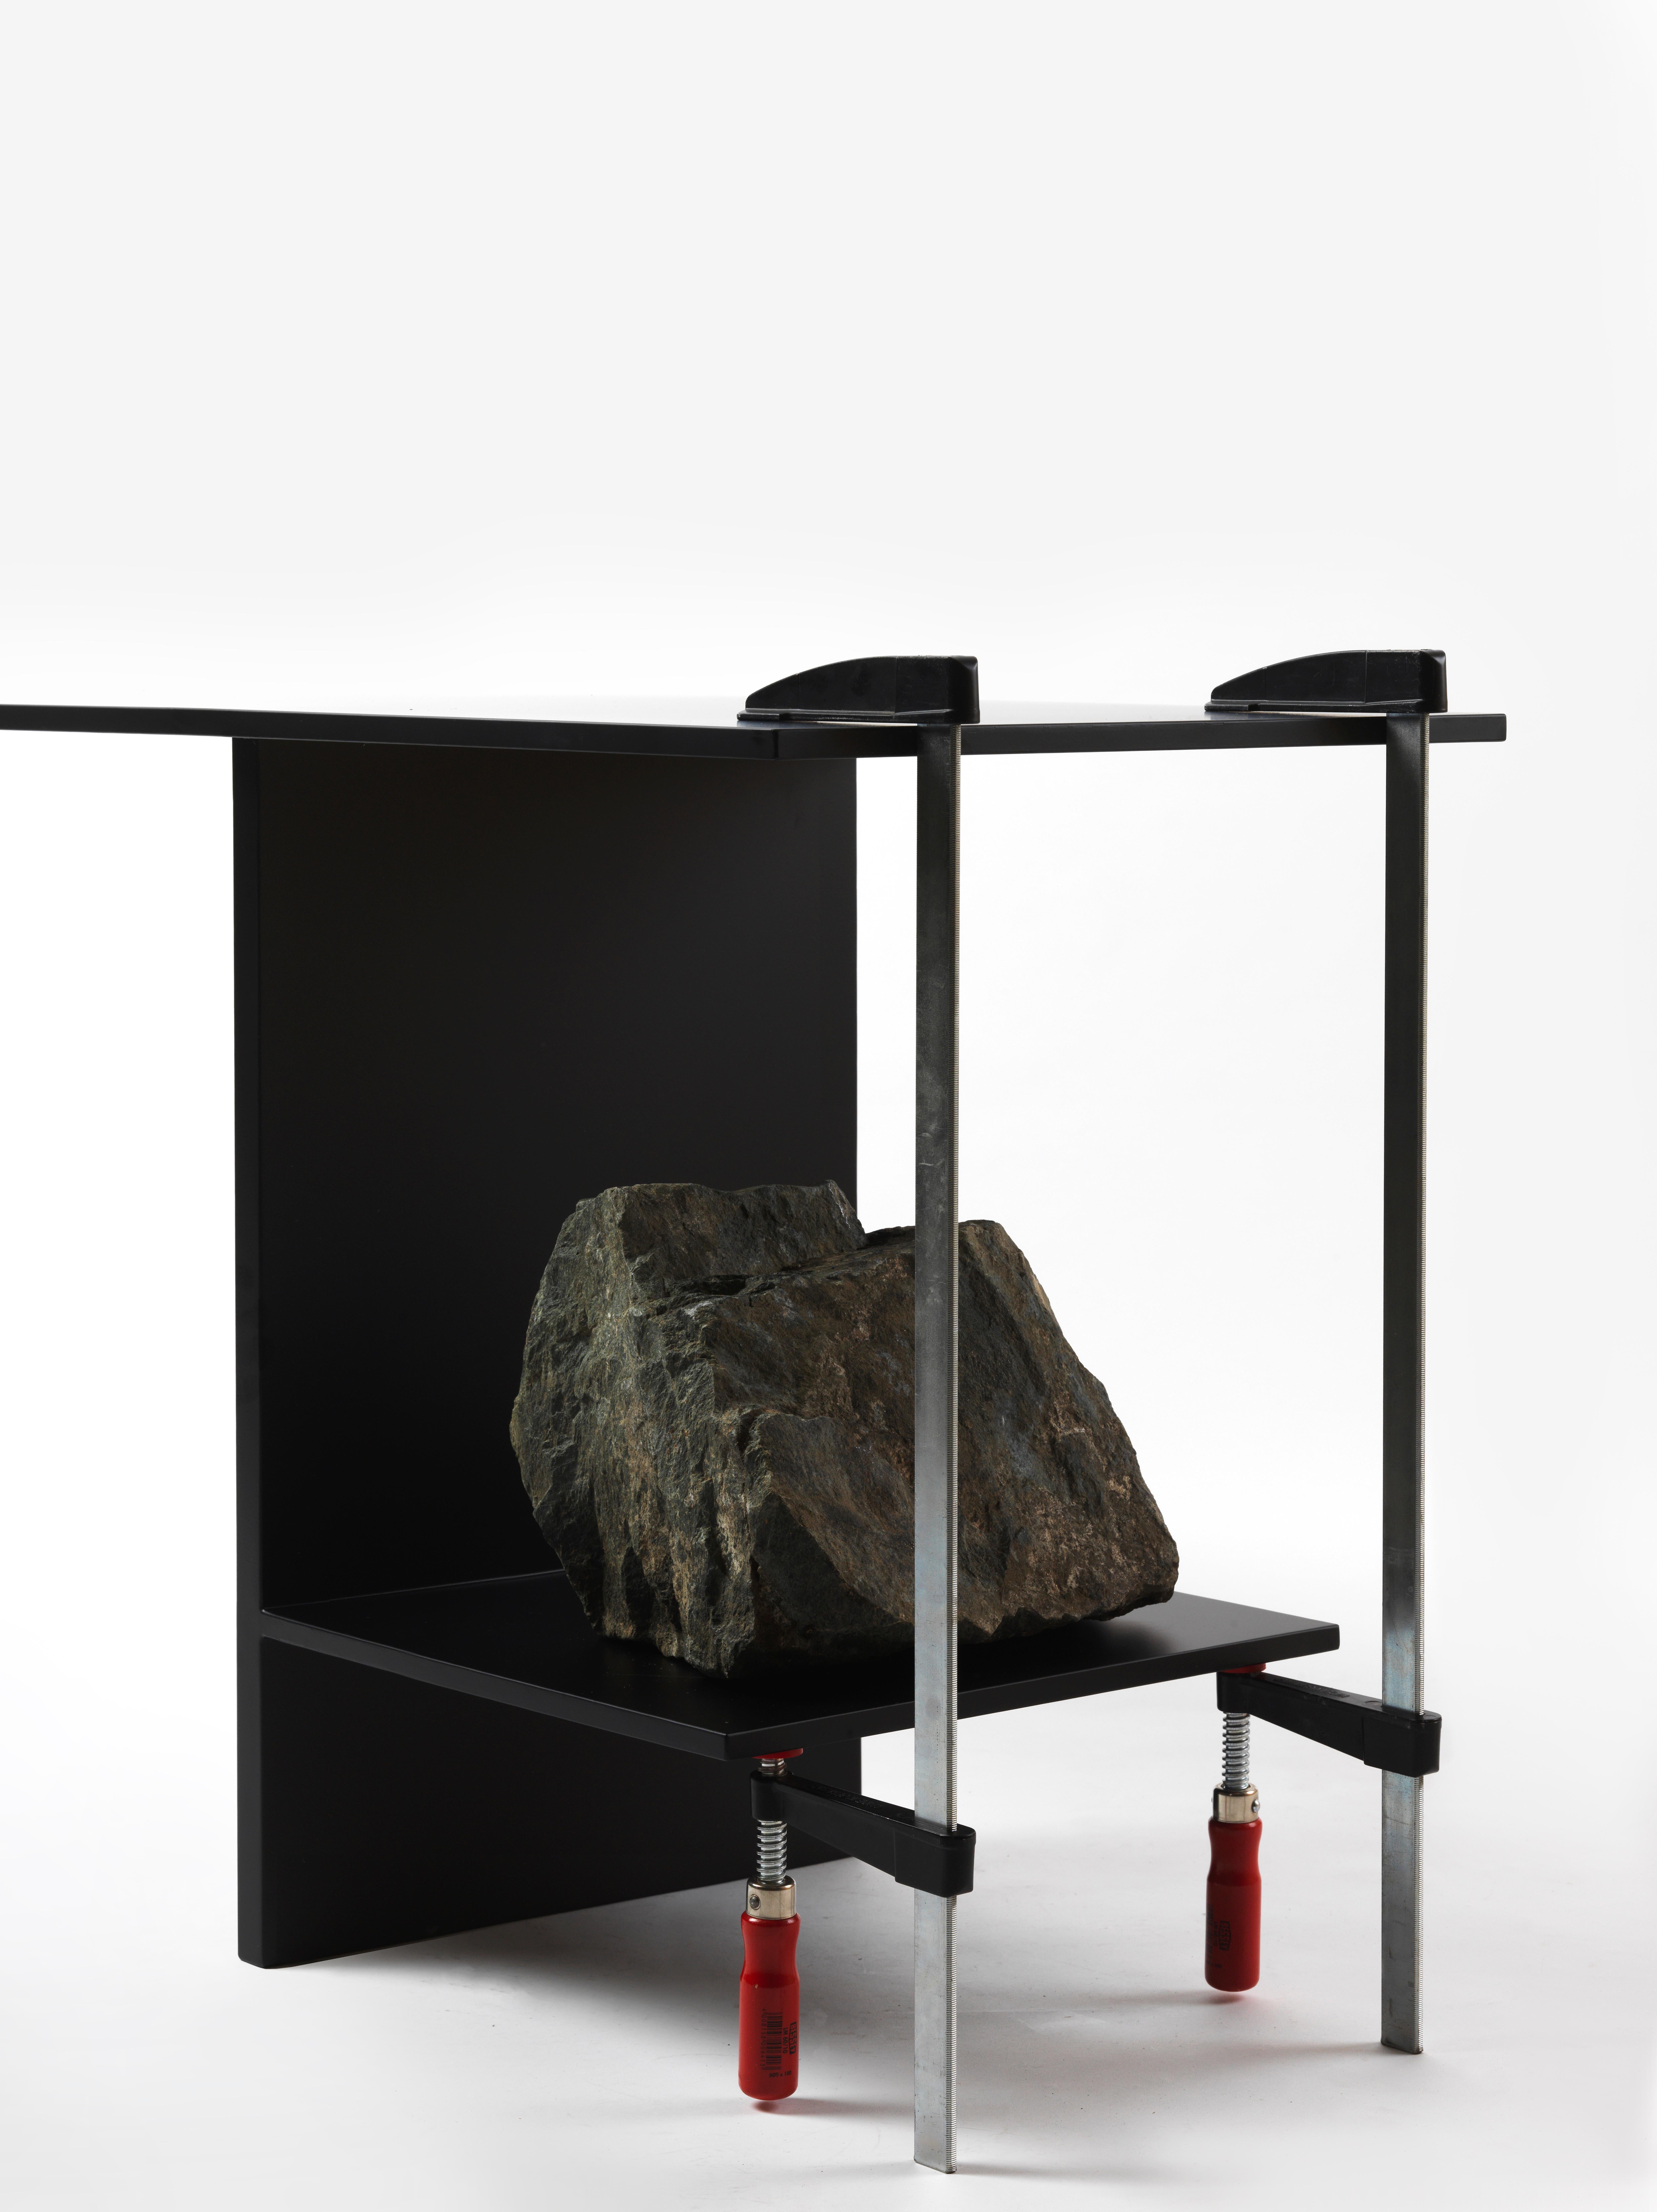 Balance table by Lee Sisan
2019
Dimensions : W 130 x D 45 x H 65 cm
Materials : Powder Coated Steel, Natural Stone

Each piece is made to order and uses natural stones, so please expect some variability in design.

The clamp, the iron plate,